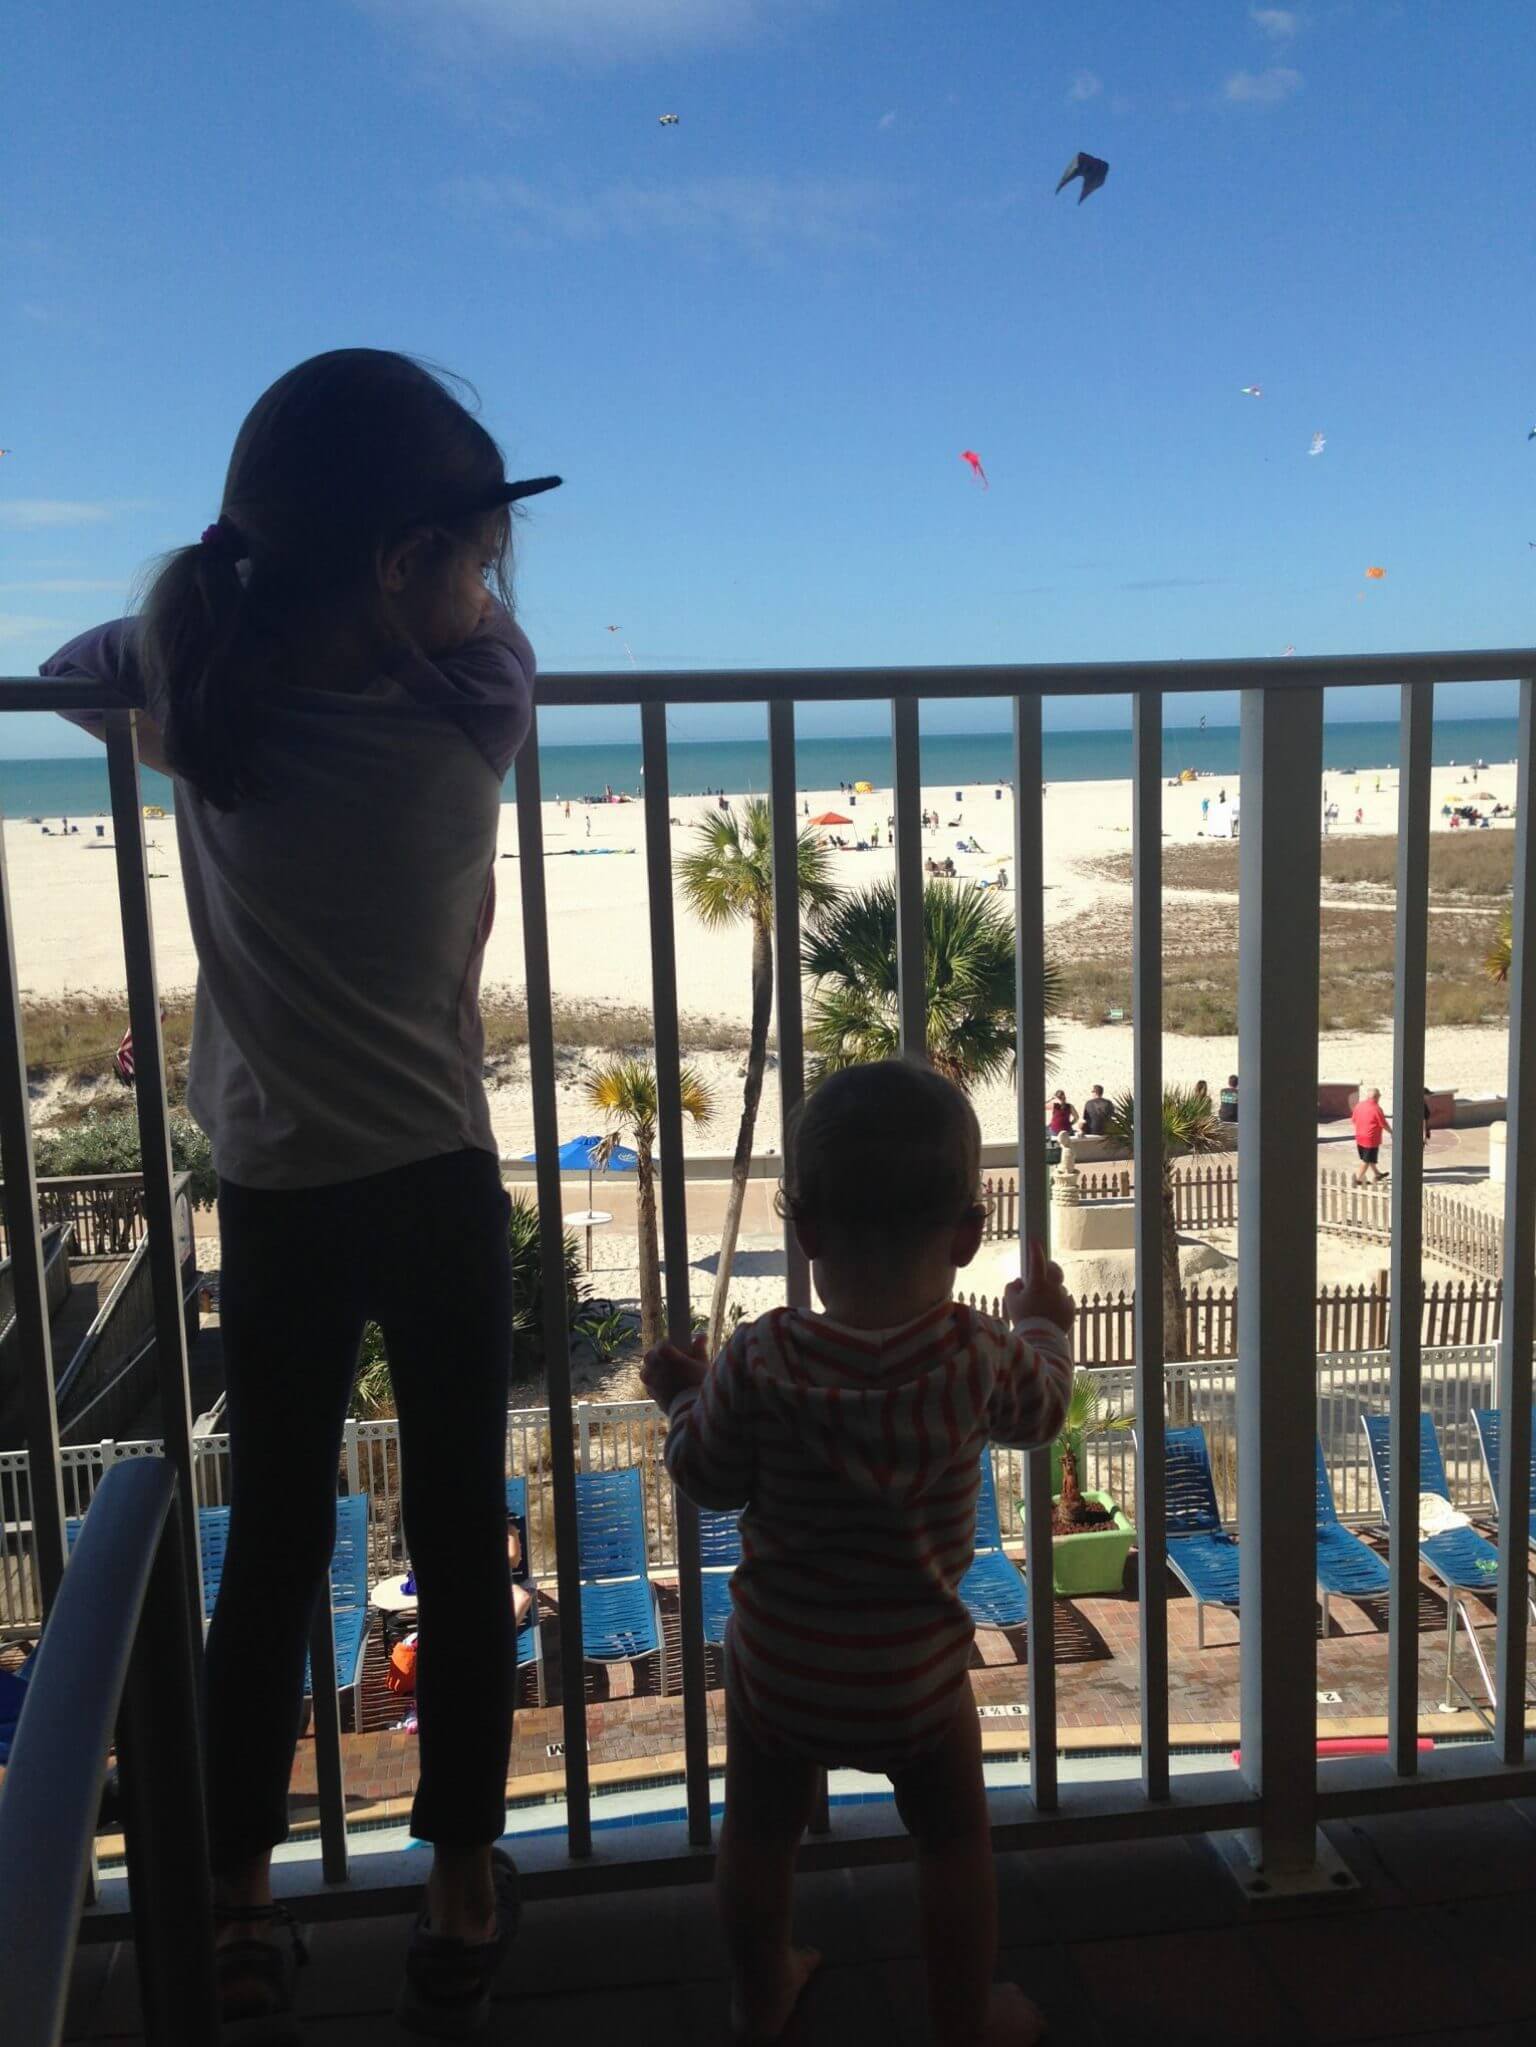 Watching kites from our balcony at the Bilmar Beach Resrt in Treasure Island, Florida.